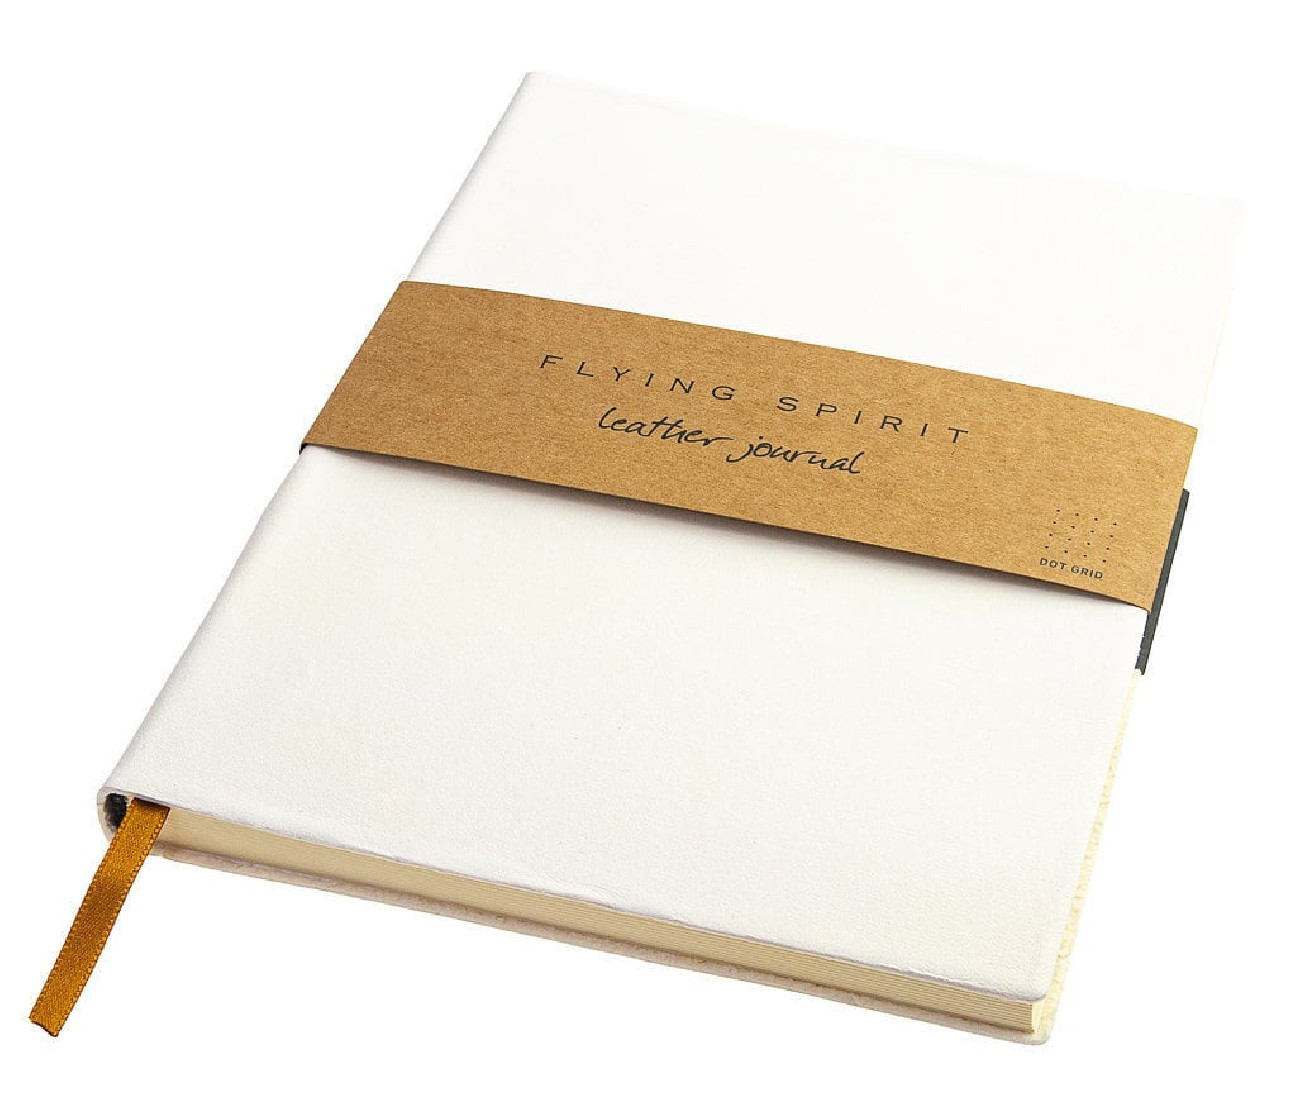 Clairefontaine Rhodia 104943C - A Flying Spirit thread sewn paperback notebook 180 ivory pages 14.8x21 cm 90 g lined, glazed lambskin leather cover, white